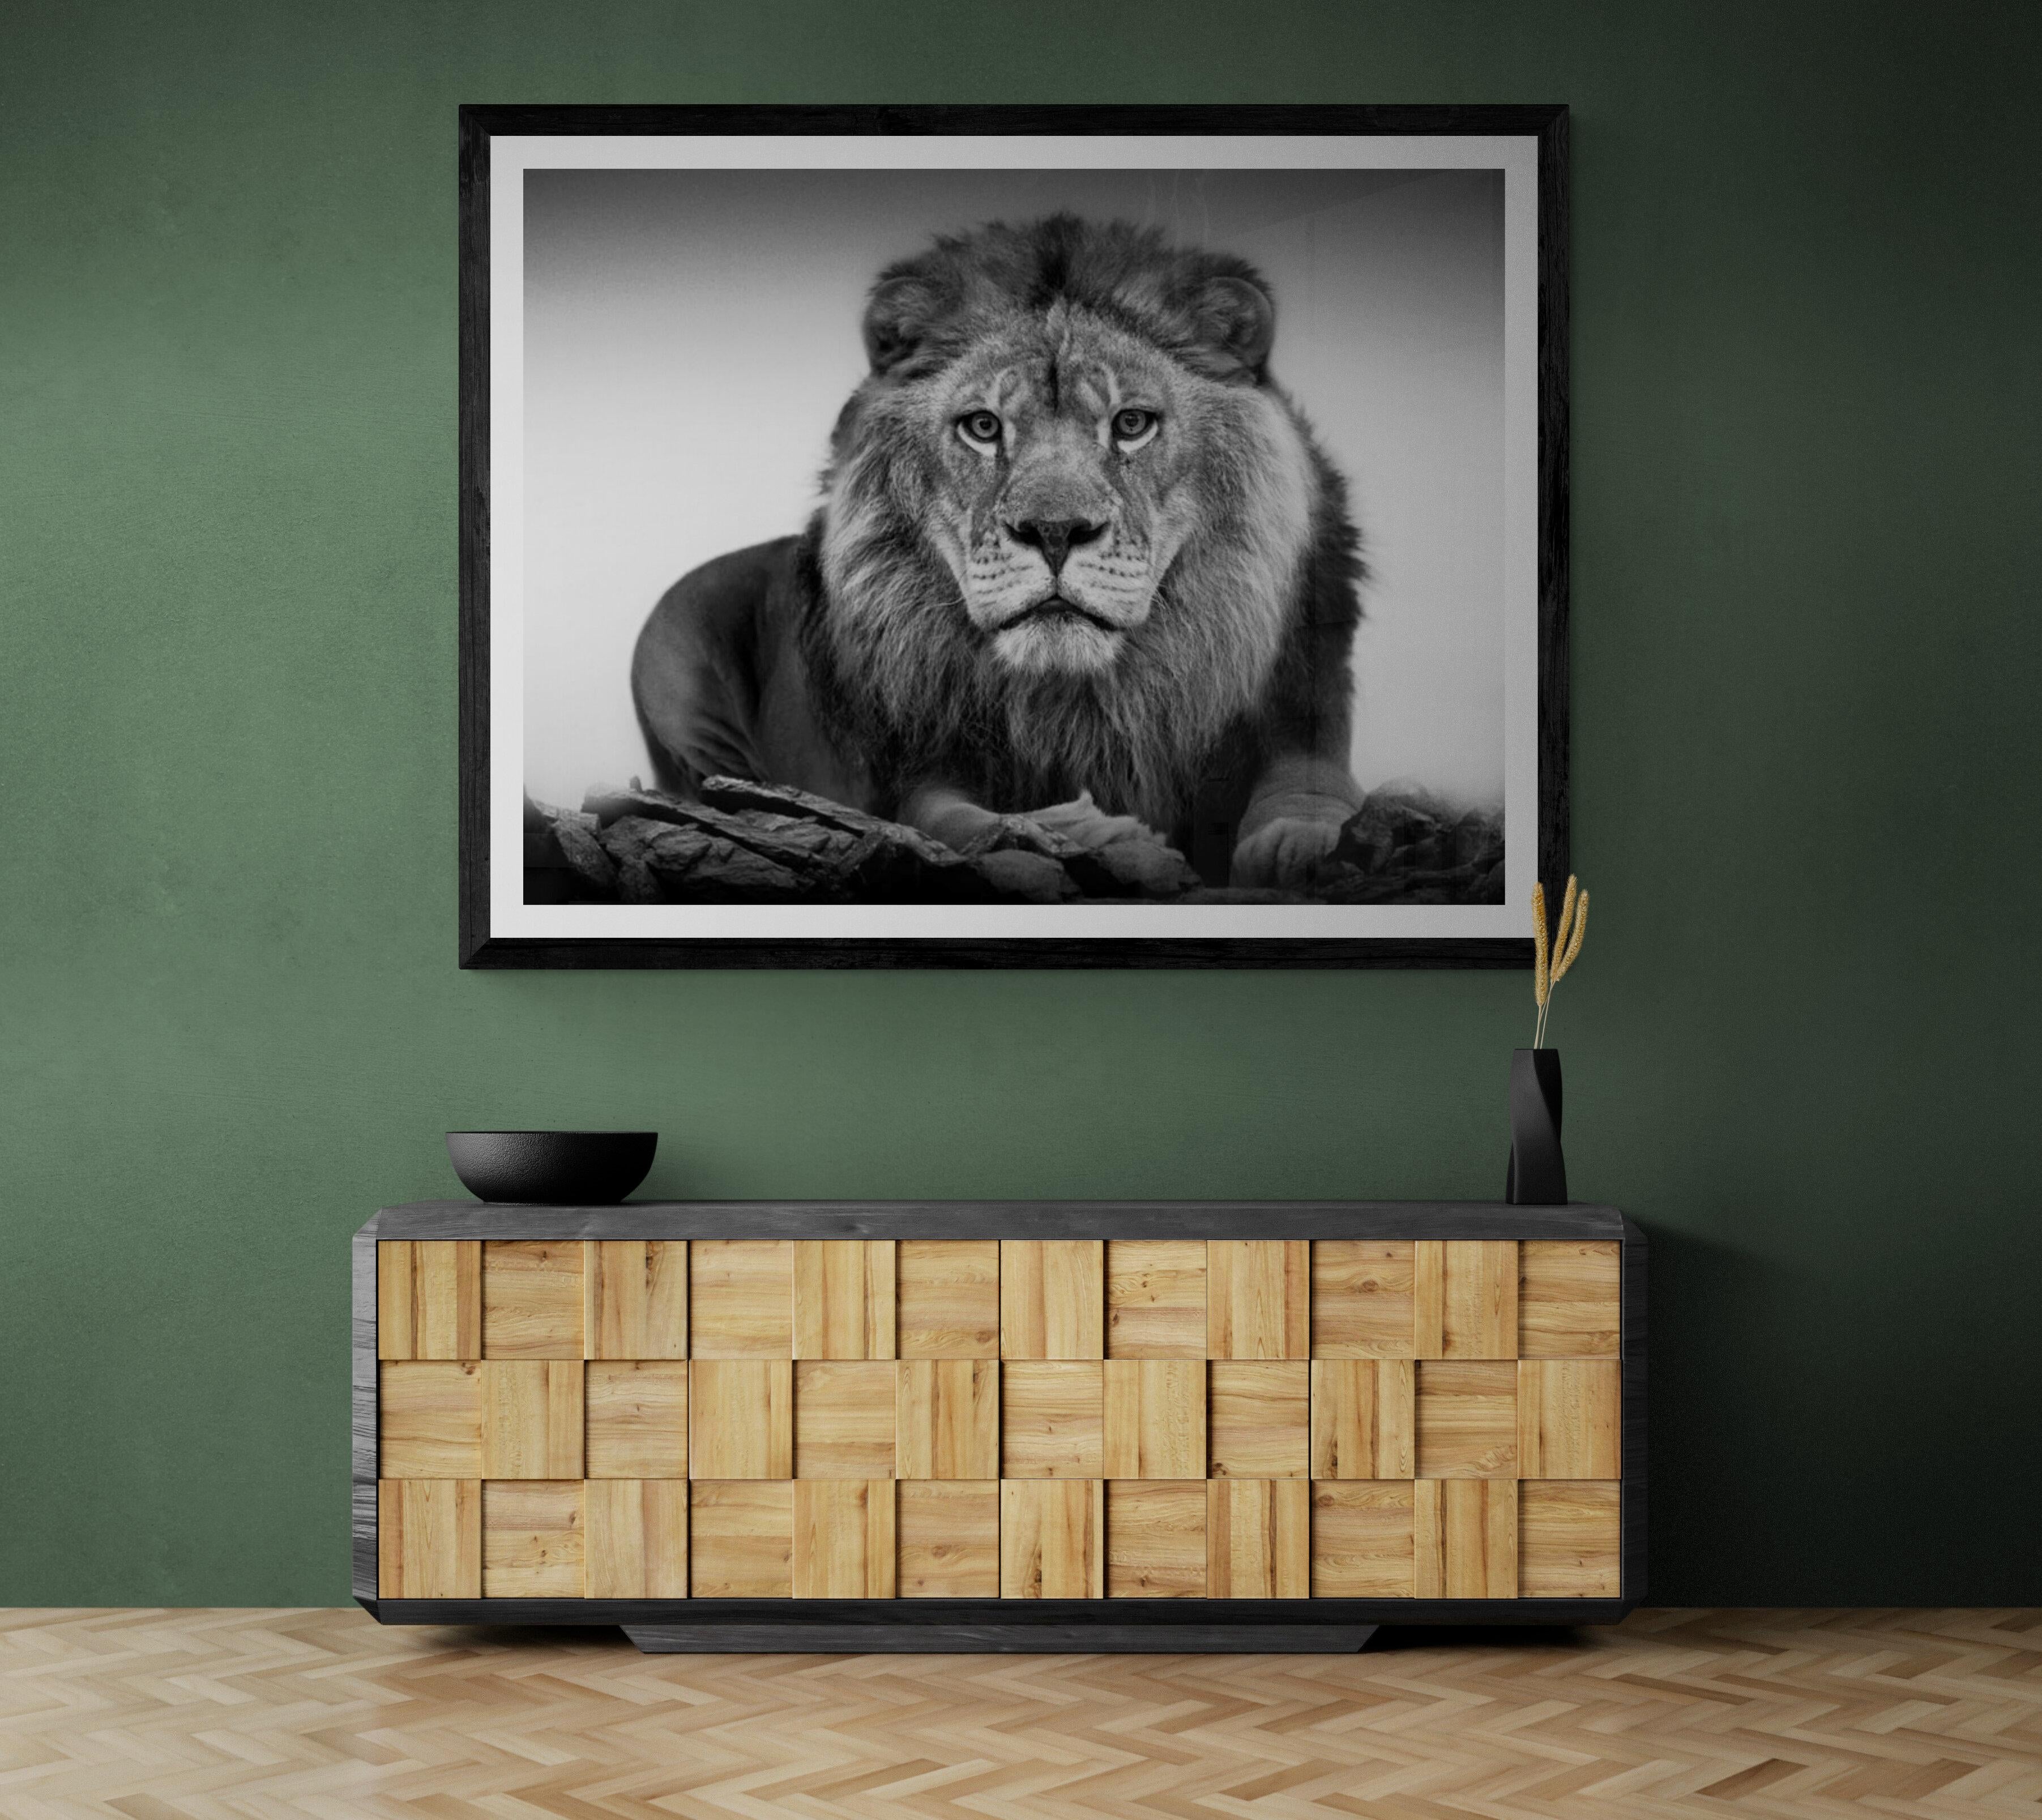 This is a contemporary photograph of an African Lion. 
28x40
Singed and Numbered
Archival Pigment print.
Framing available. Inquire for rates. 

FREE SHIPPING

Shane Russeck has built a reputation for capturing America's landscapes, cultures and